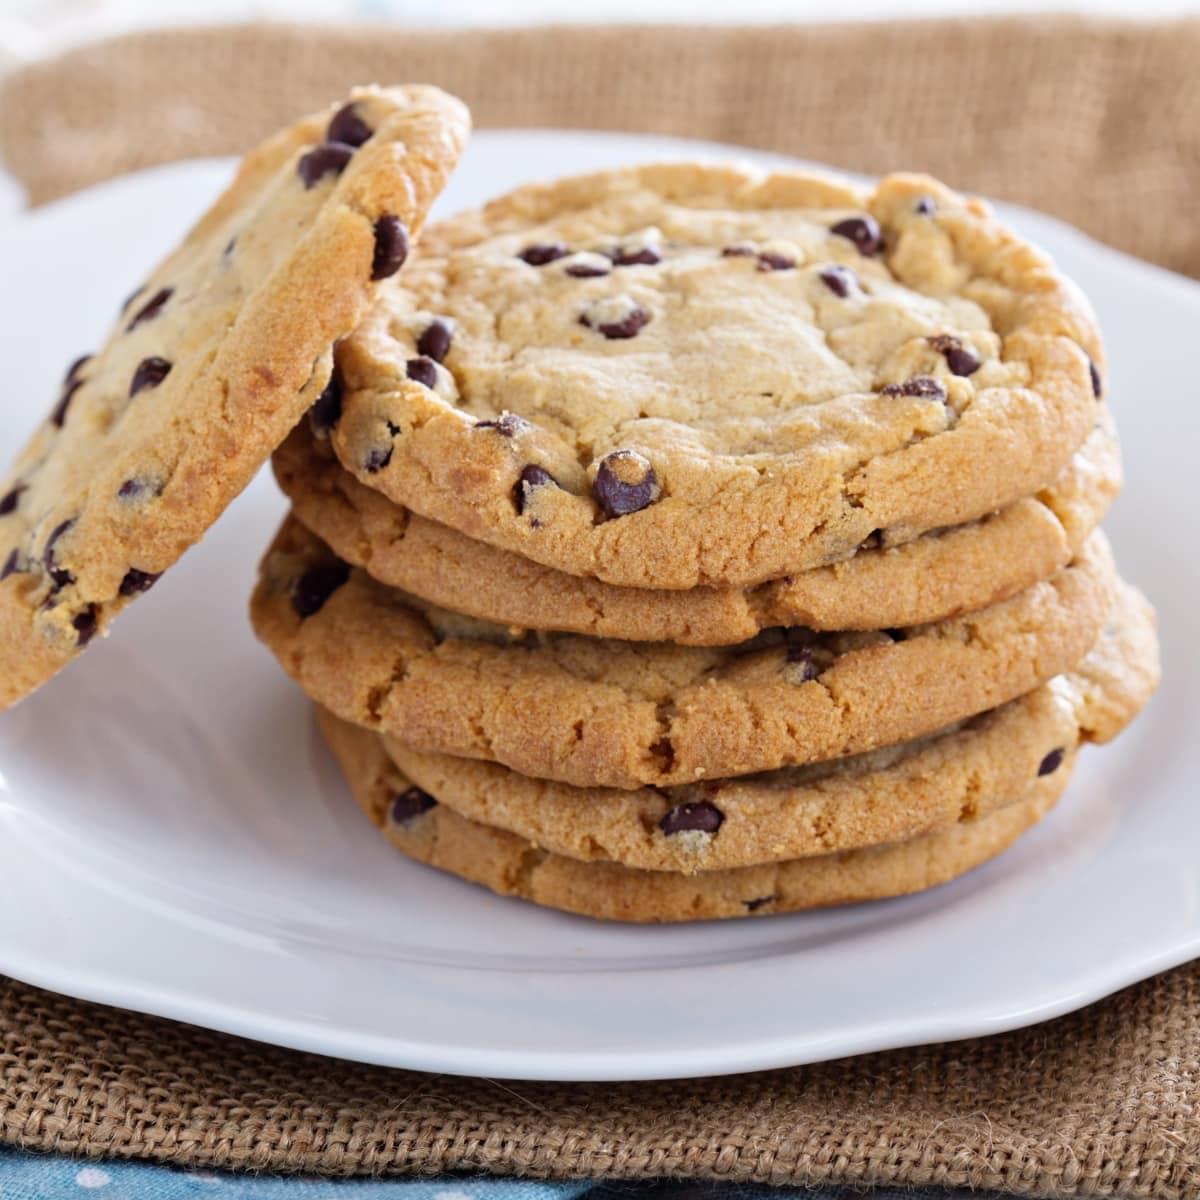 Stack of Brown Butter Chocolate Chip Cookies on a Plate